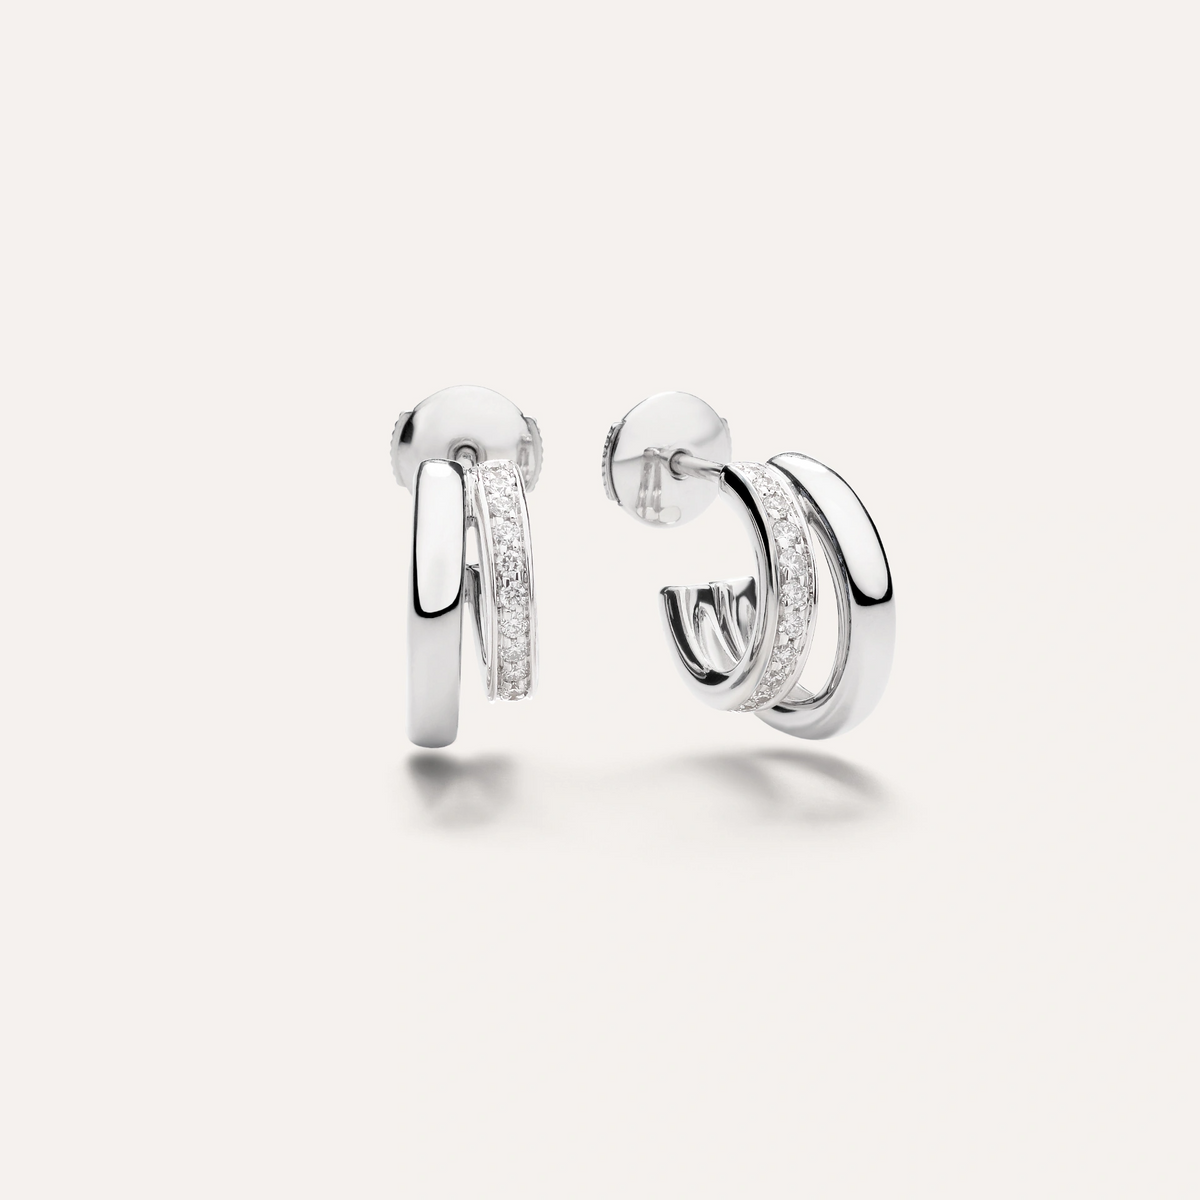 Pomellato Together Double Loop Earrings in 18k White Gold with White Diamonds - Orsini Jewellers